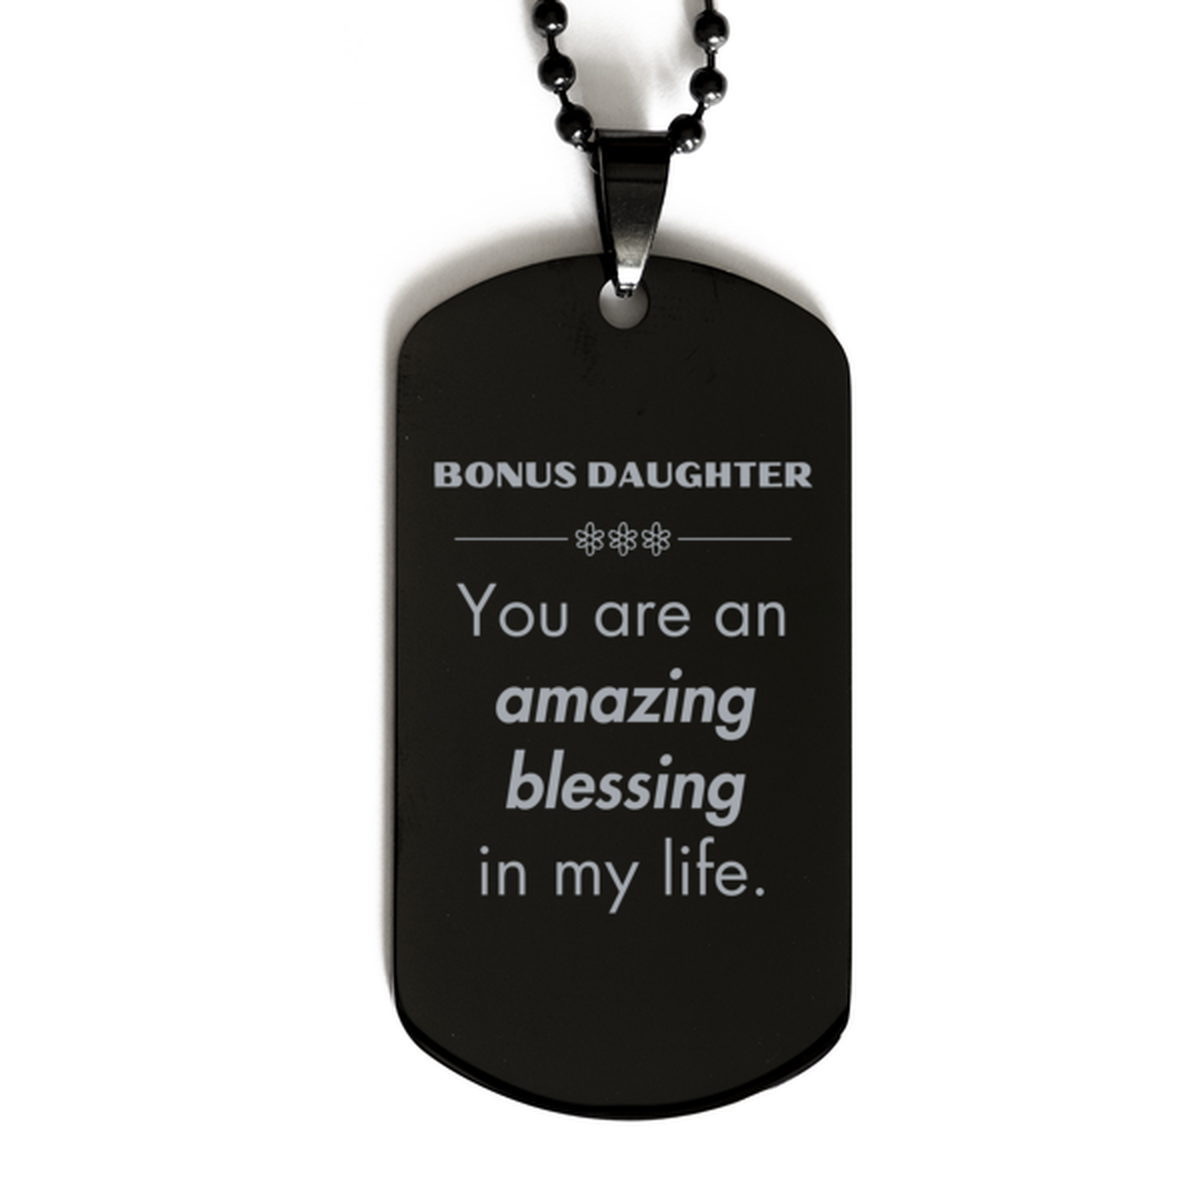 Bonus Daughter Black Dog Tag, You are an amazing blessing in my life, Thank You Gifts For Bonus Daughter, Inspirational Birthday Christmas Unique Gifts For Bonus Daughter